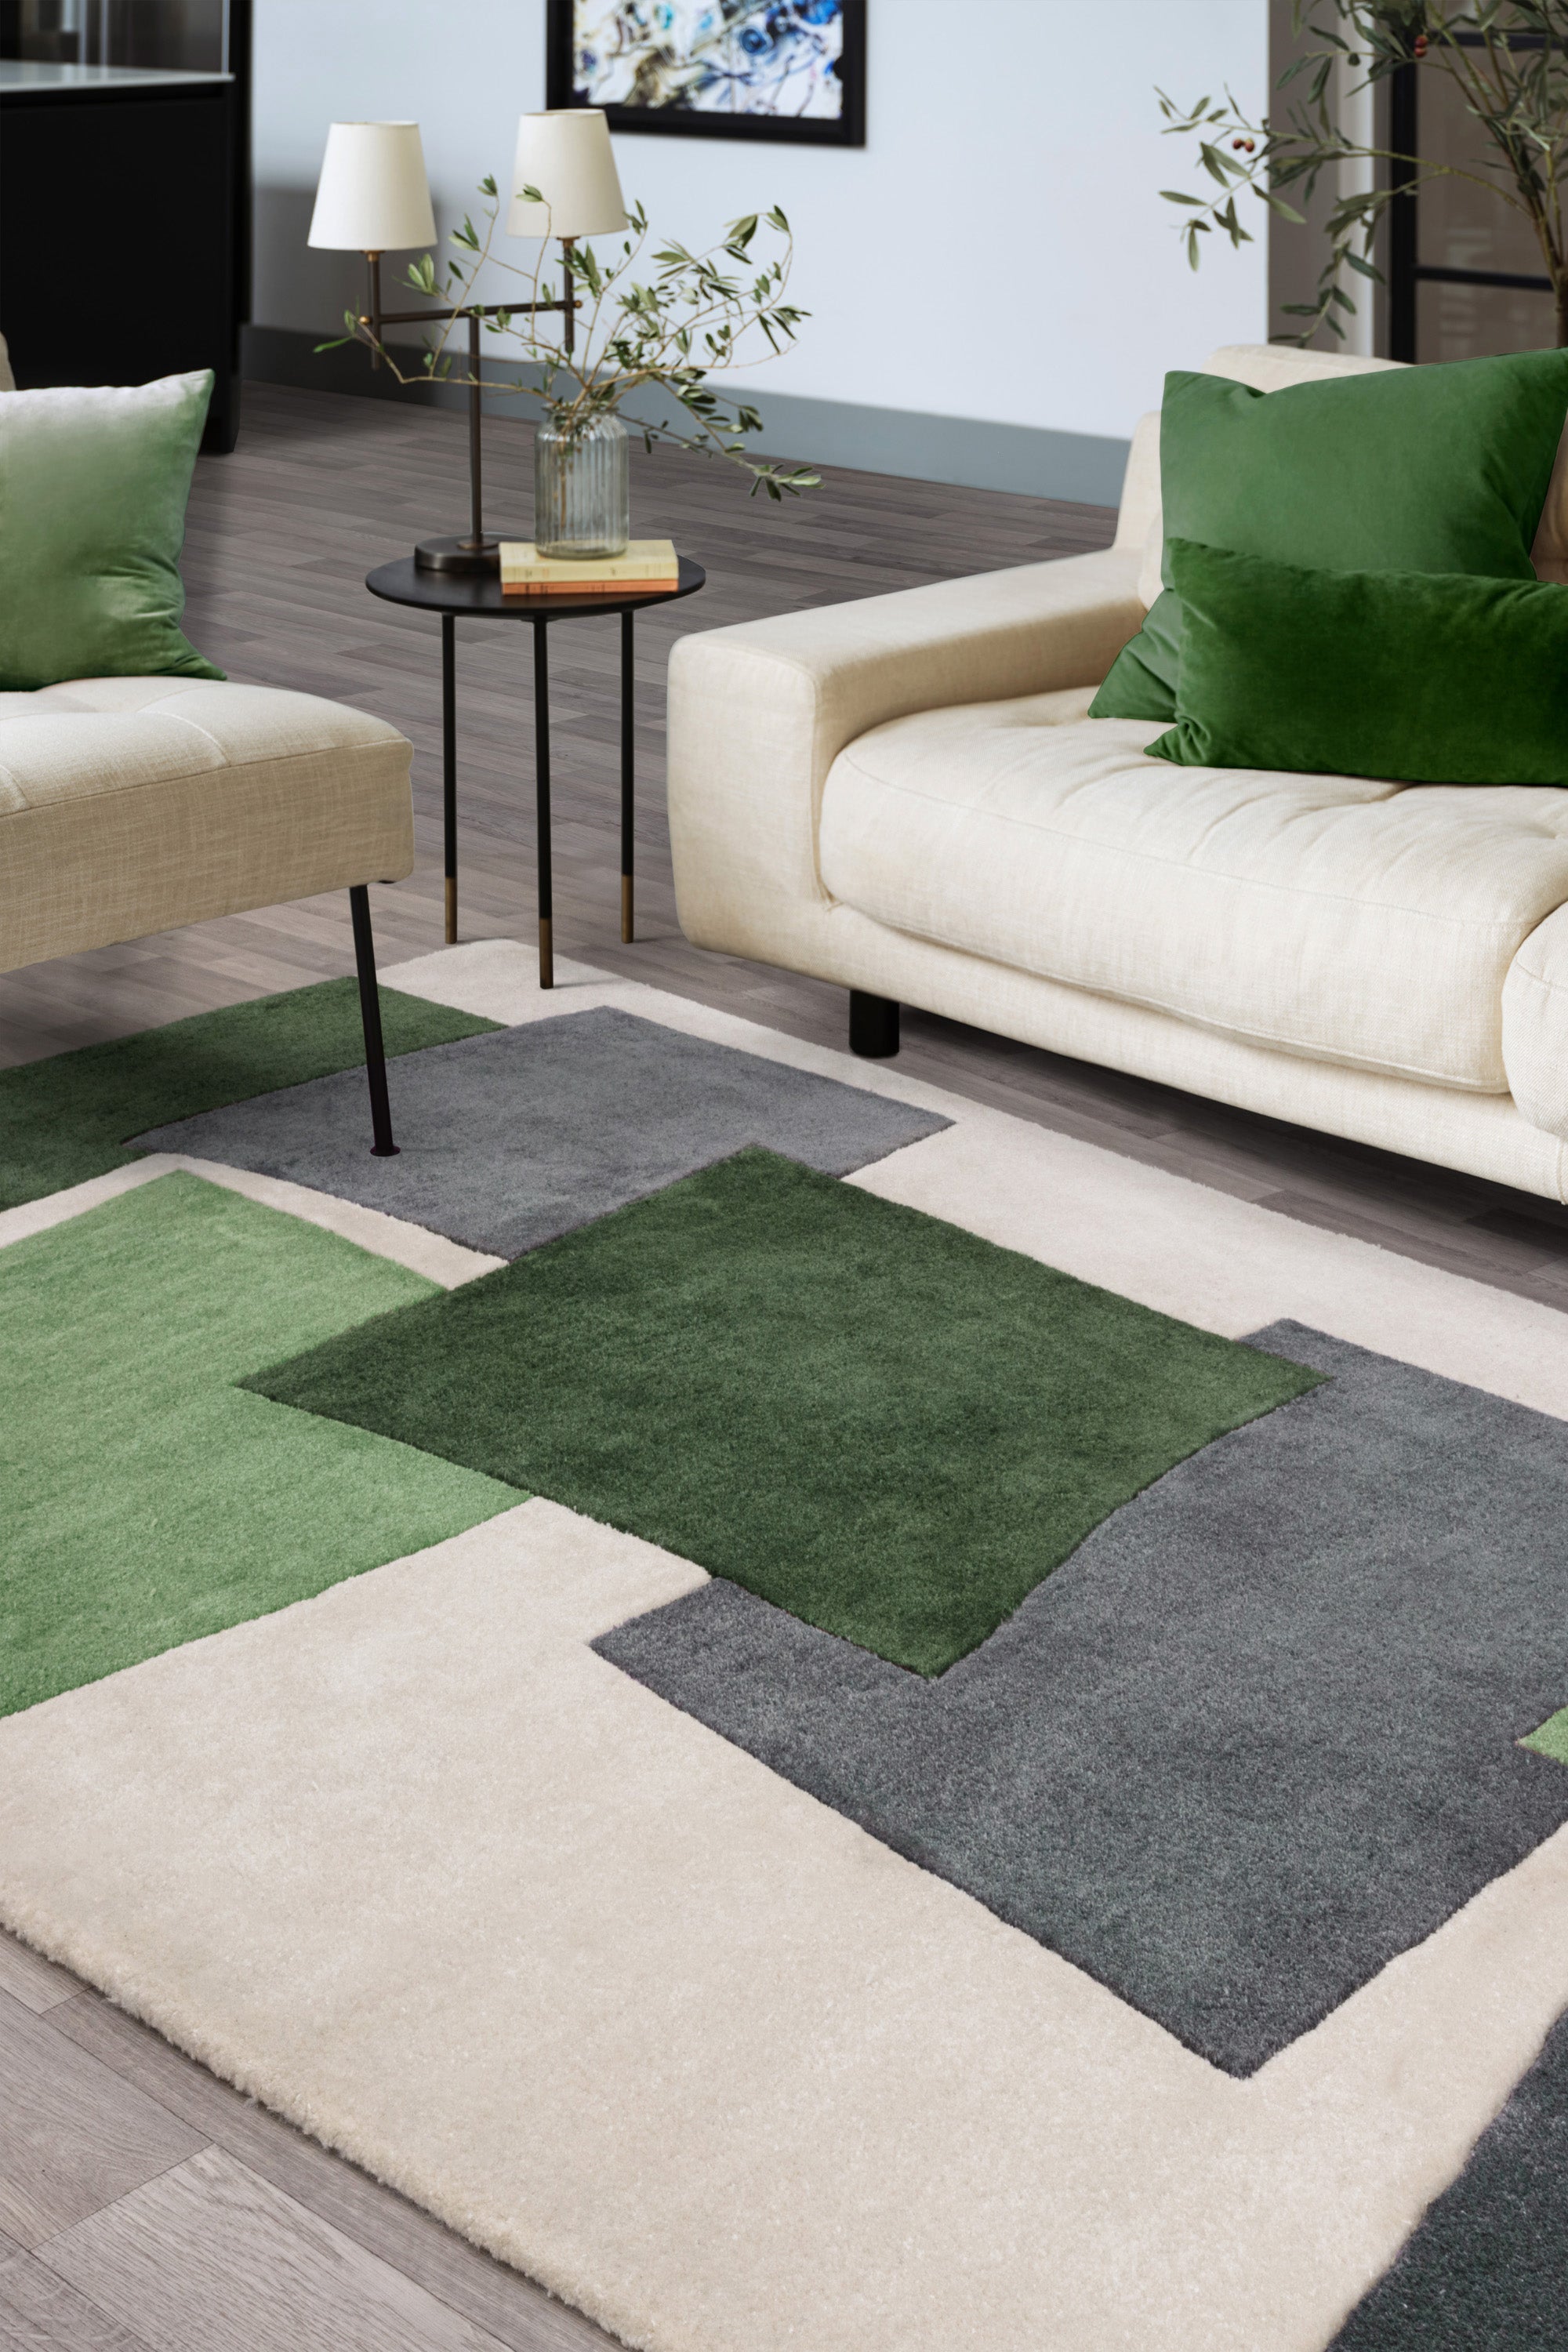 Green rug with an abstract rectangular pattern